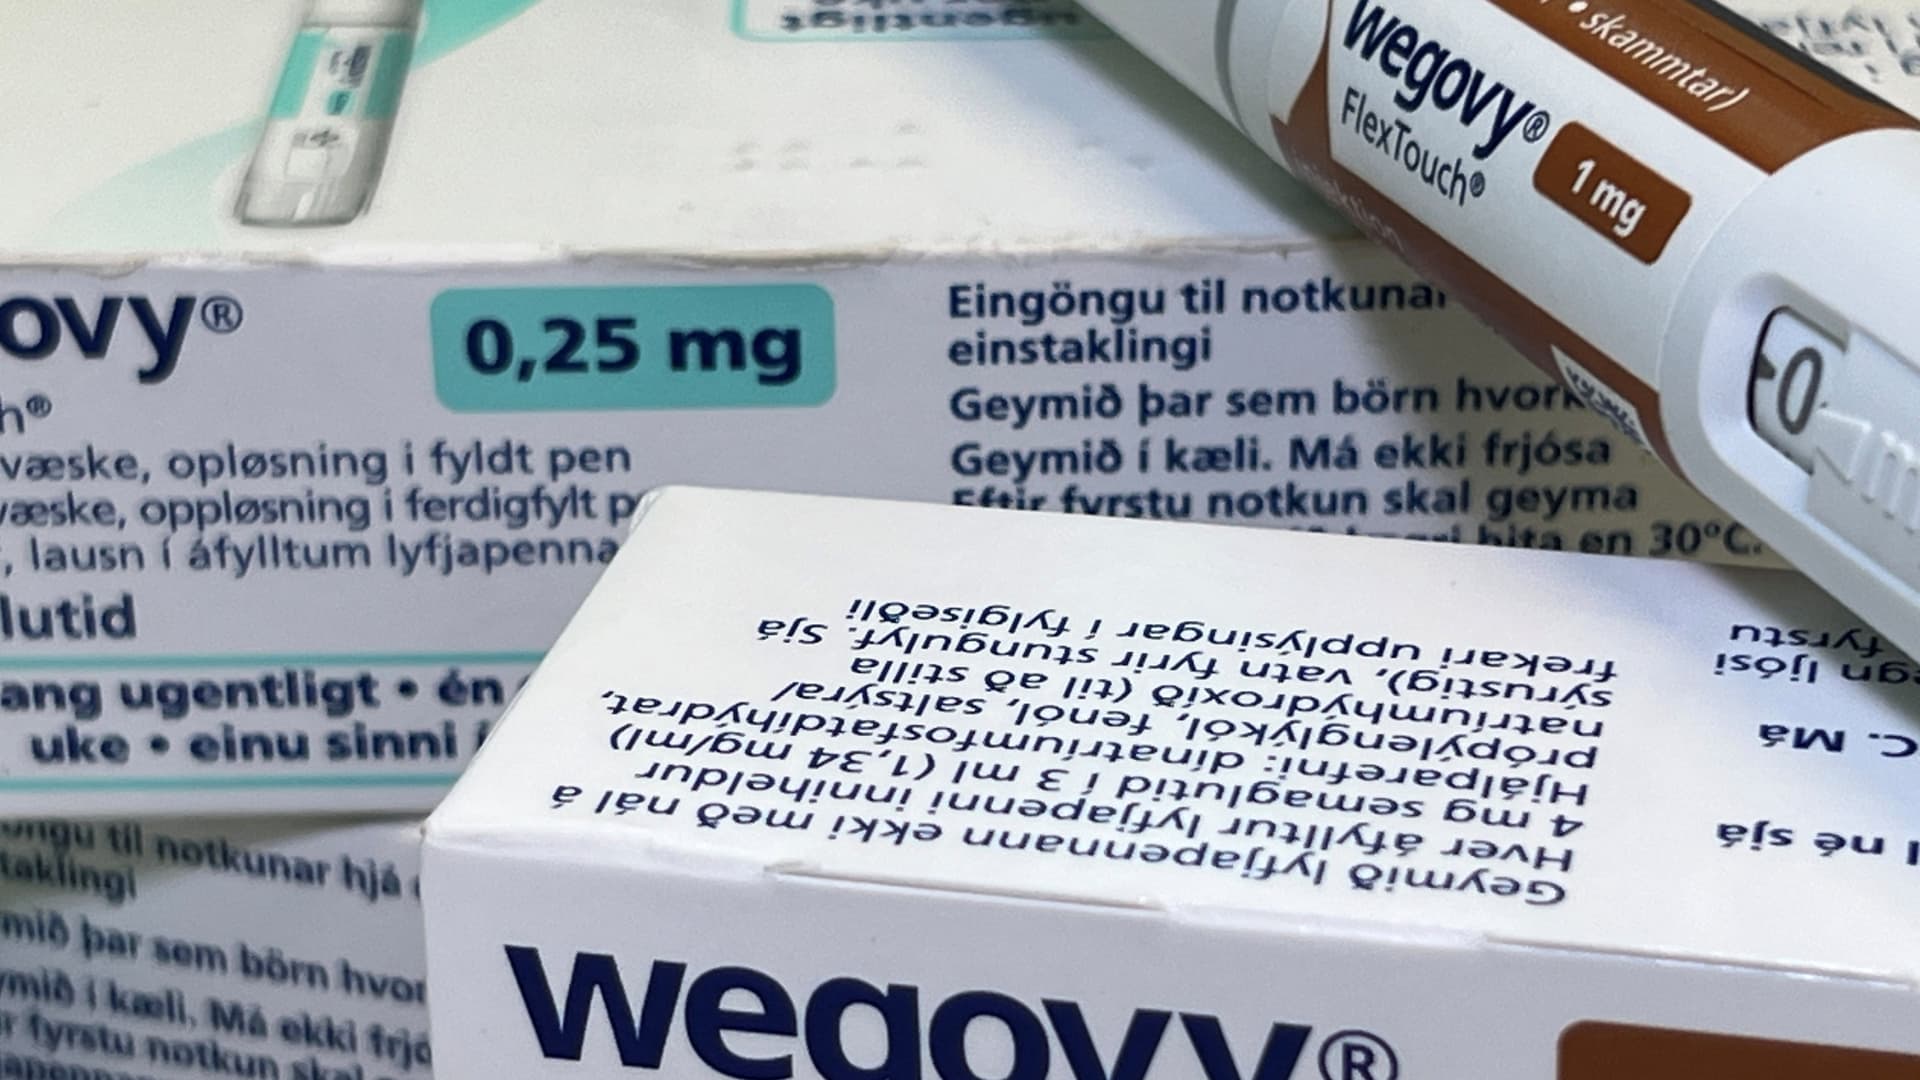 Weight loss drug Wegovy is now approved for heart health — but that won’t mean broad insurance coverage just yet